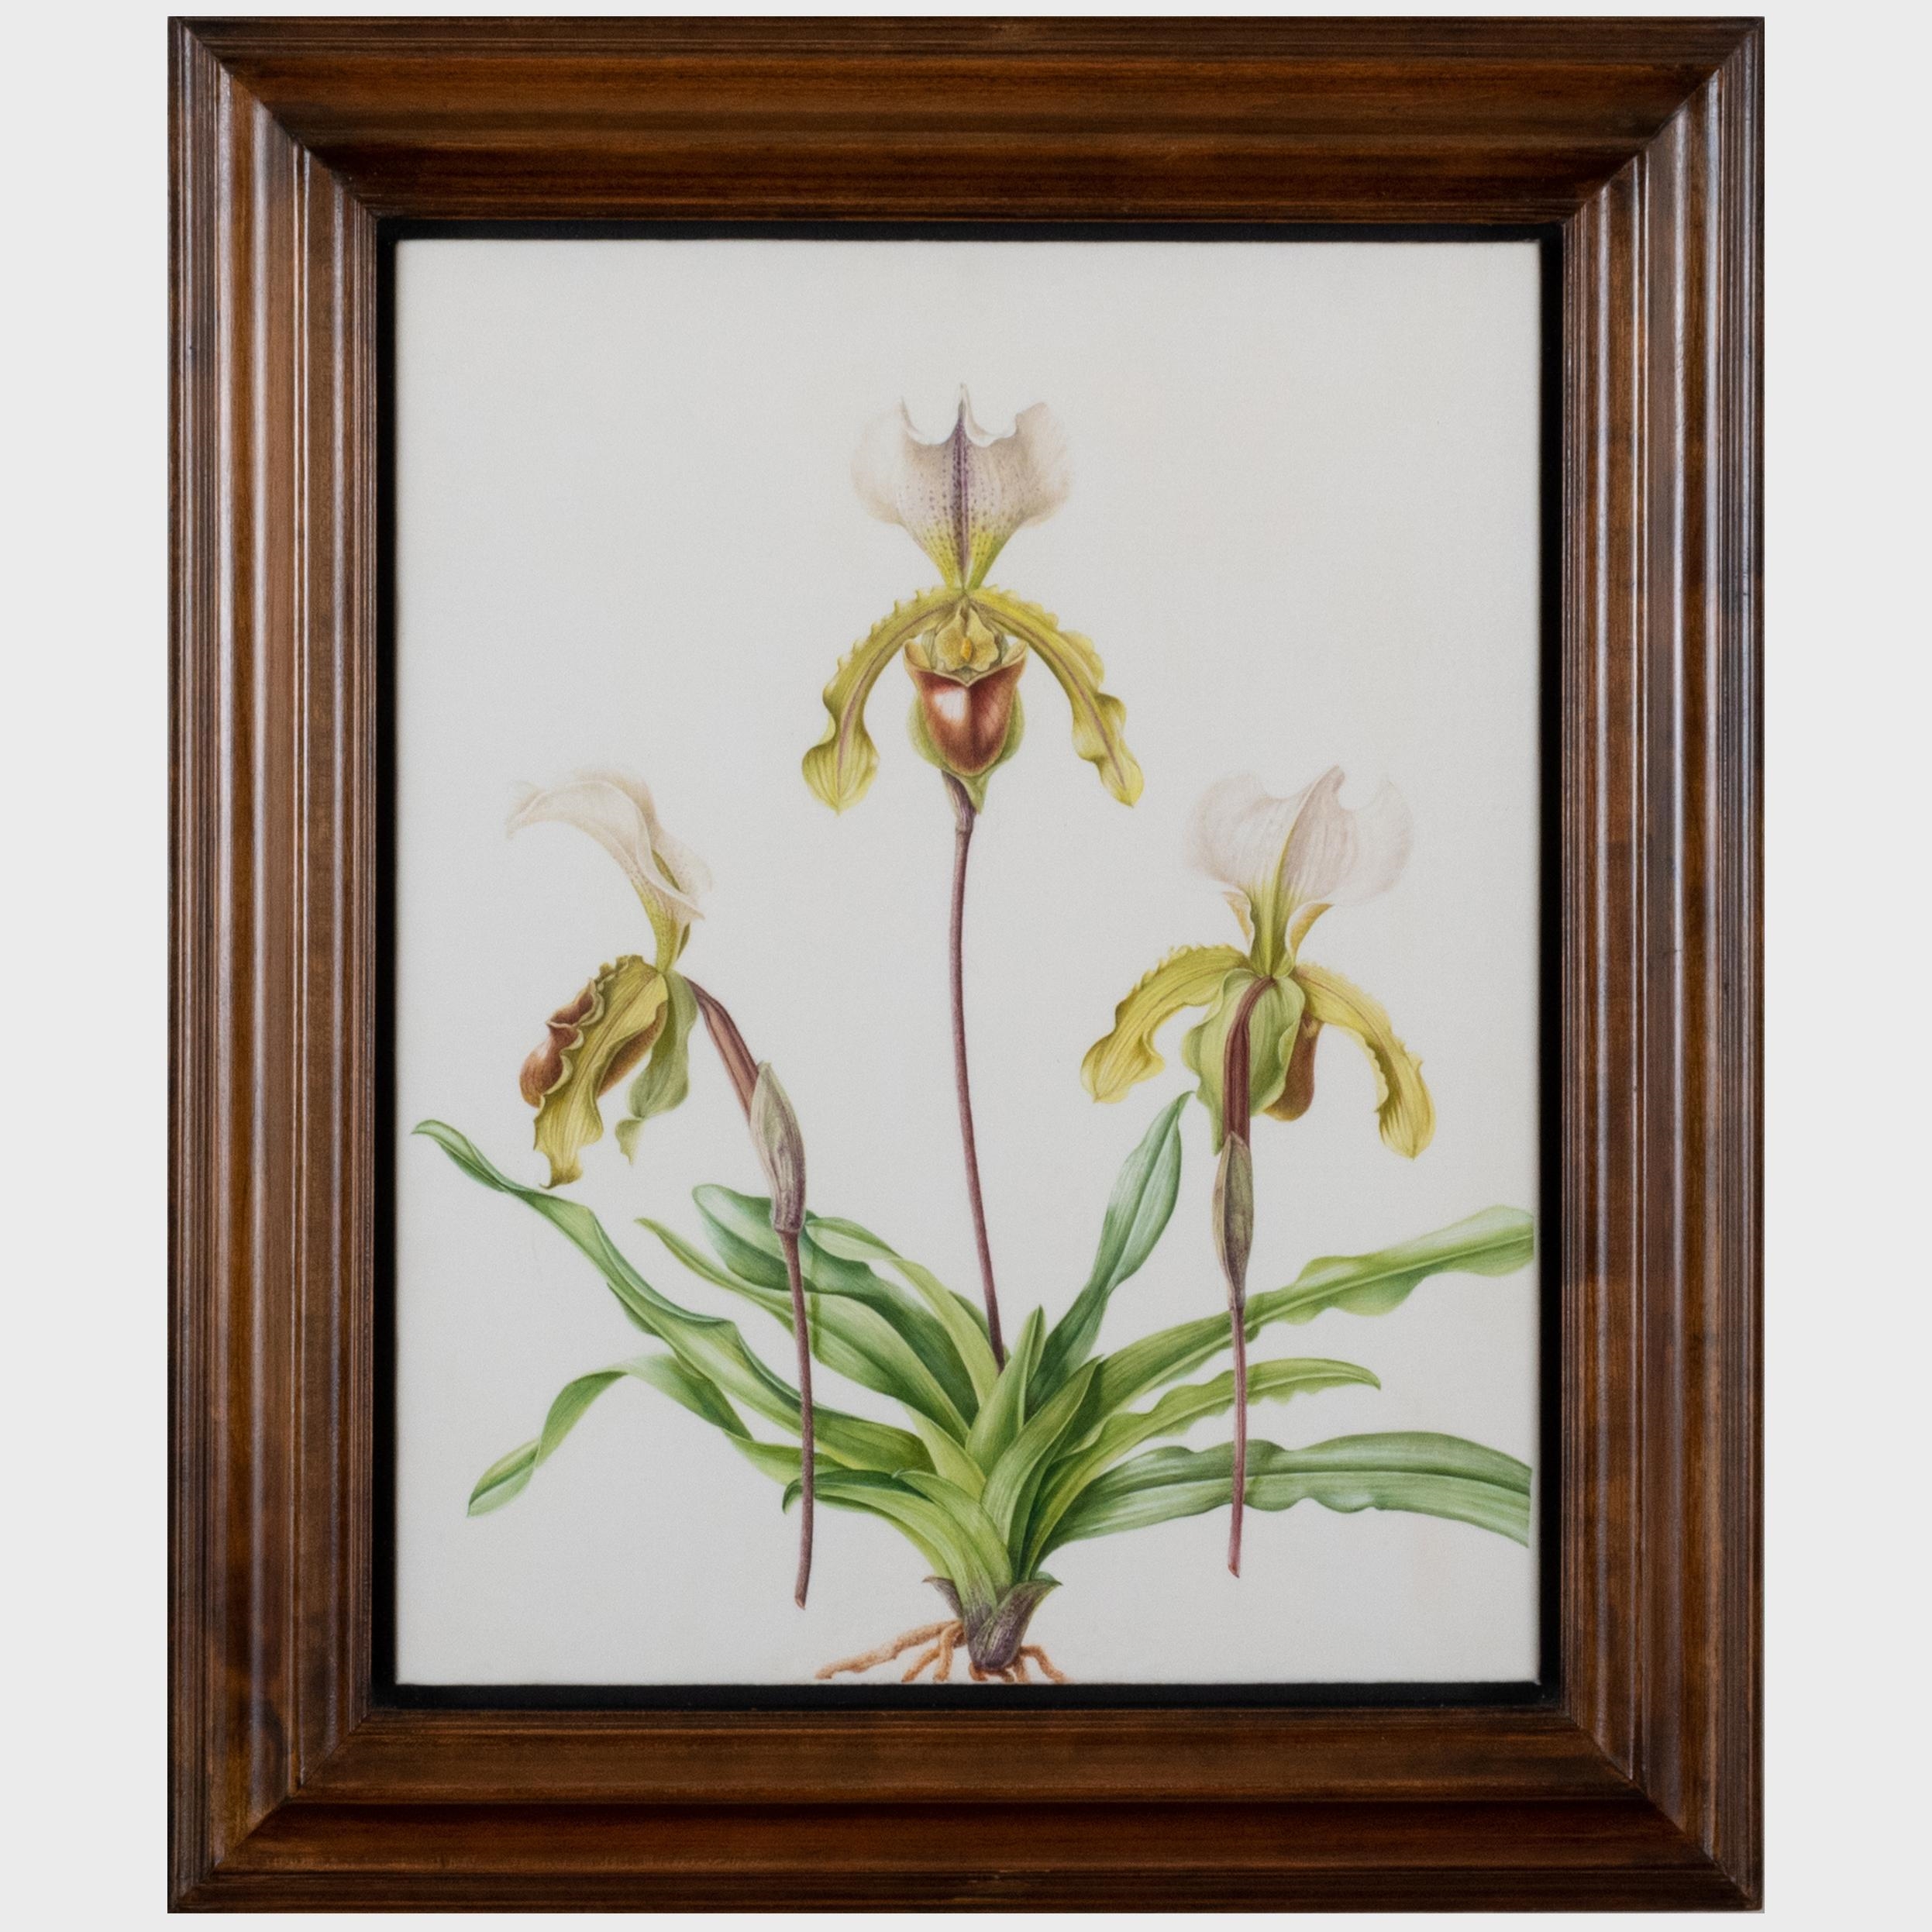 Artwork by Brigid Edwards, Parrot Tulip 'Fantasy' ; Hellebore ; and Slipper Orchid, Made of watercolor and pencil on vellum